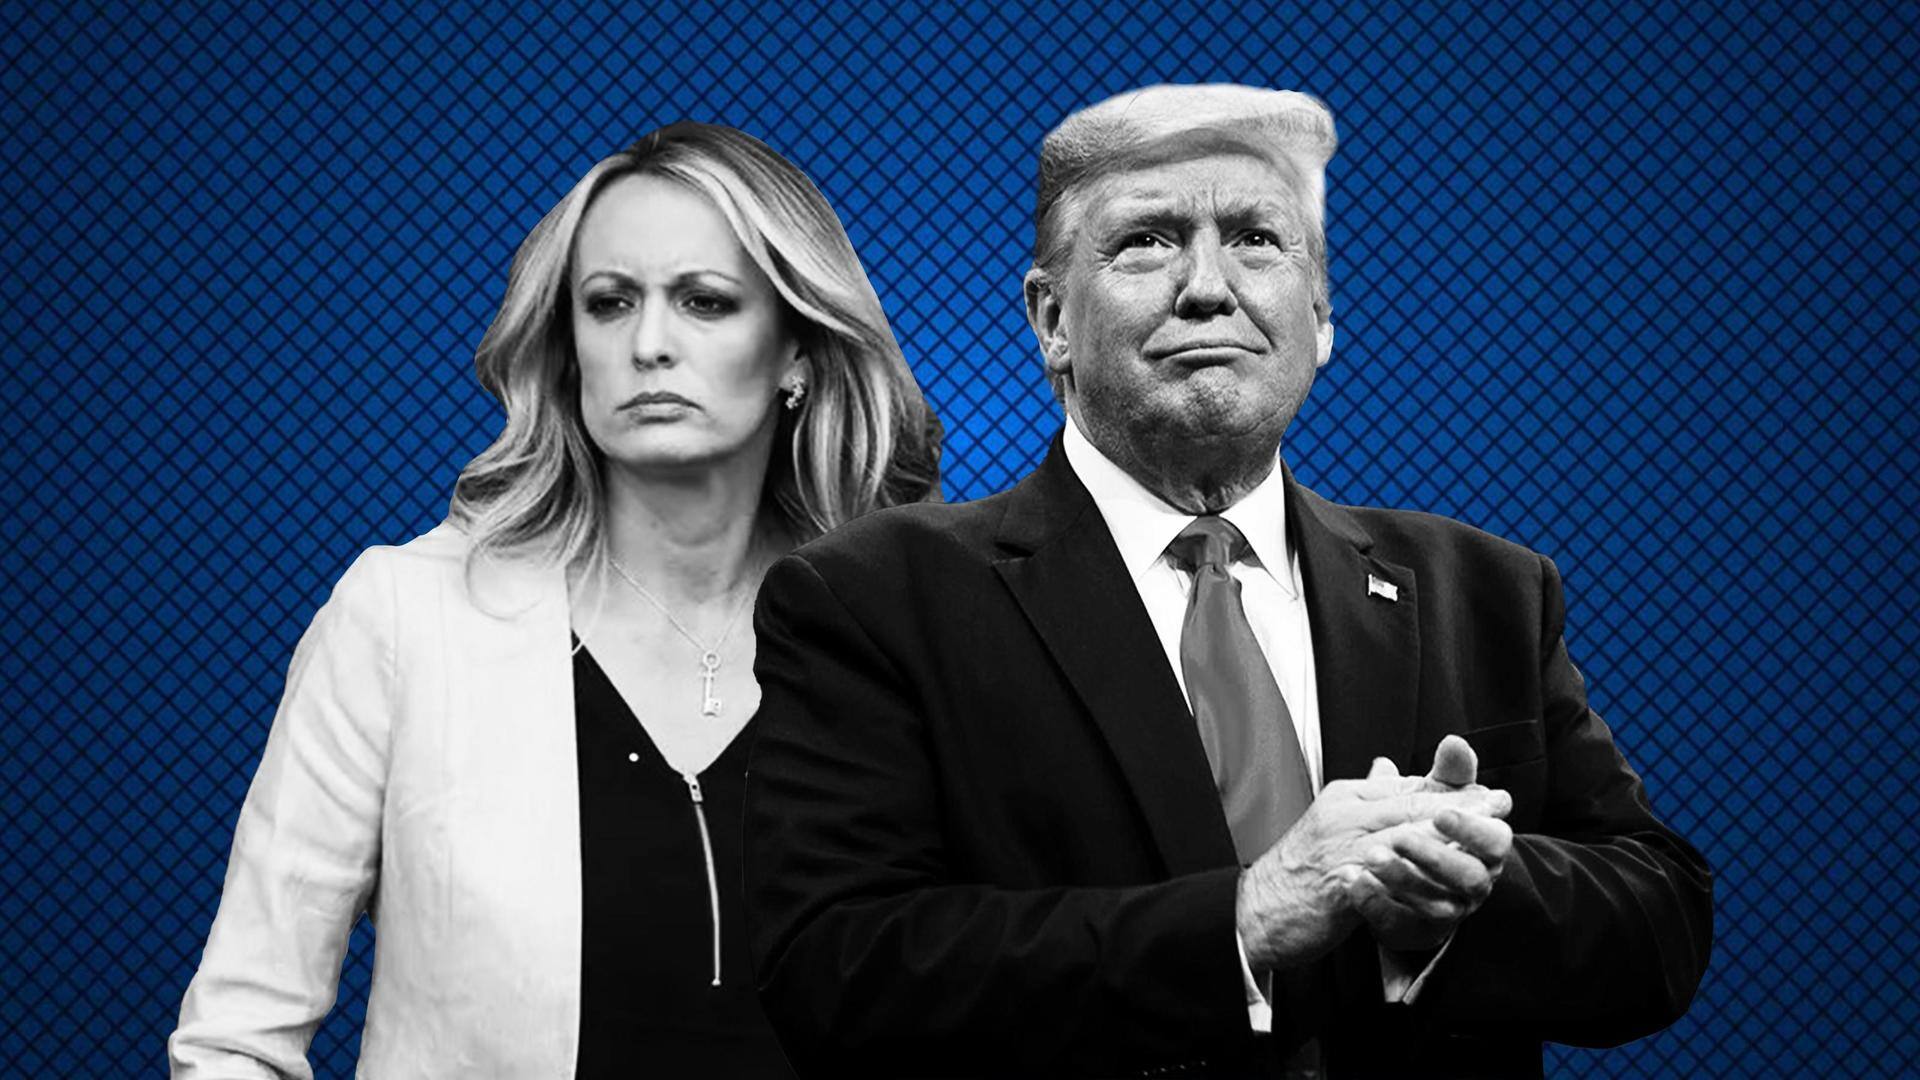 Trump gets legal relief in defamation case by Stormy Daniels